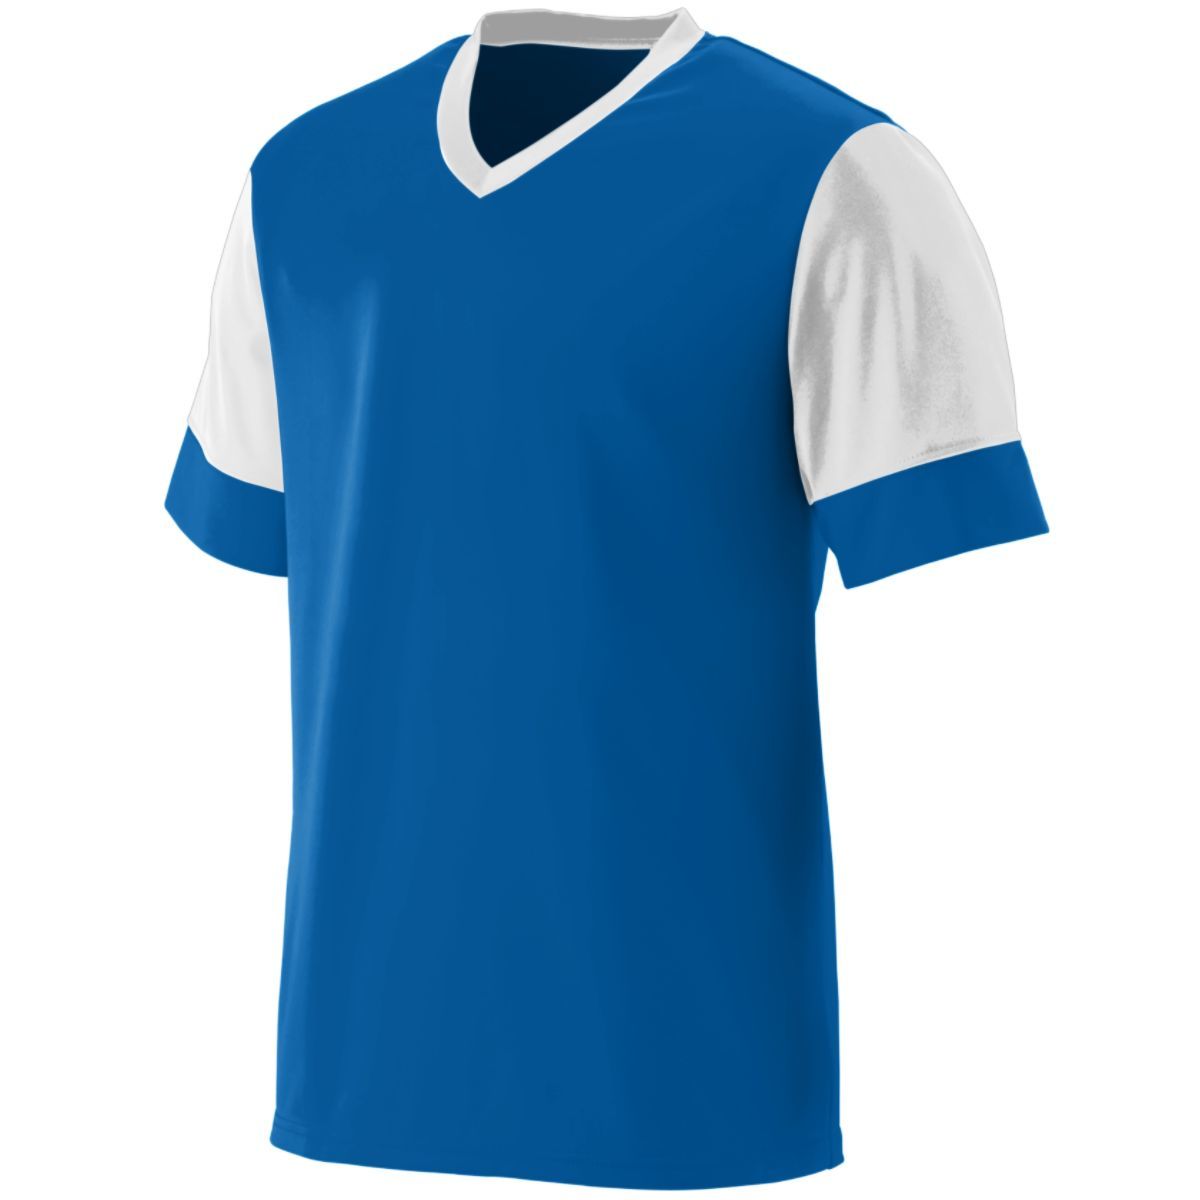 Augusta Sportswear Youth Lightning Jersey in Royal/White  -Part of the Youth, Youth-Jersey, Augusta-Products, Soccer, Shirts, All-Sports-1 product lines at KanaleyCreations.com